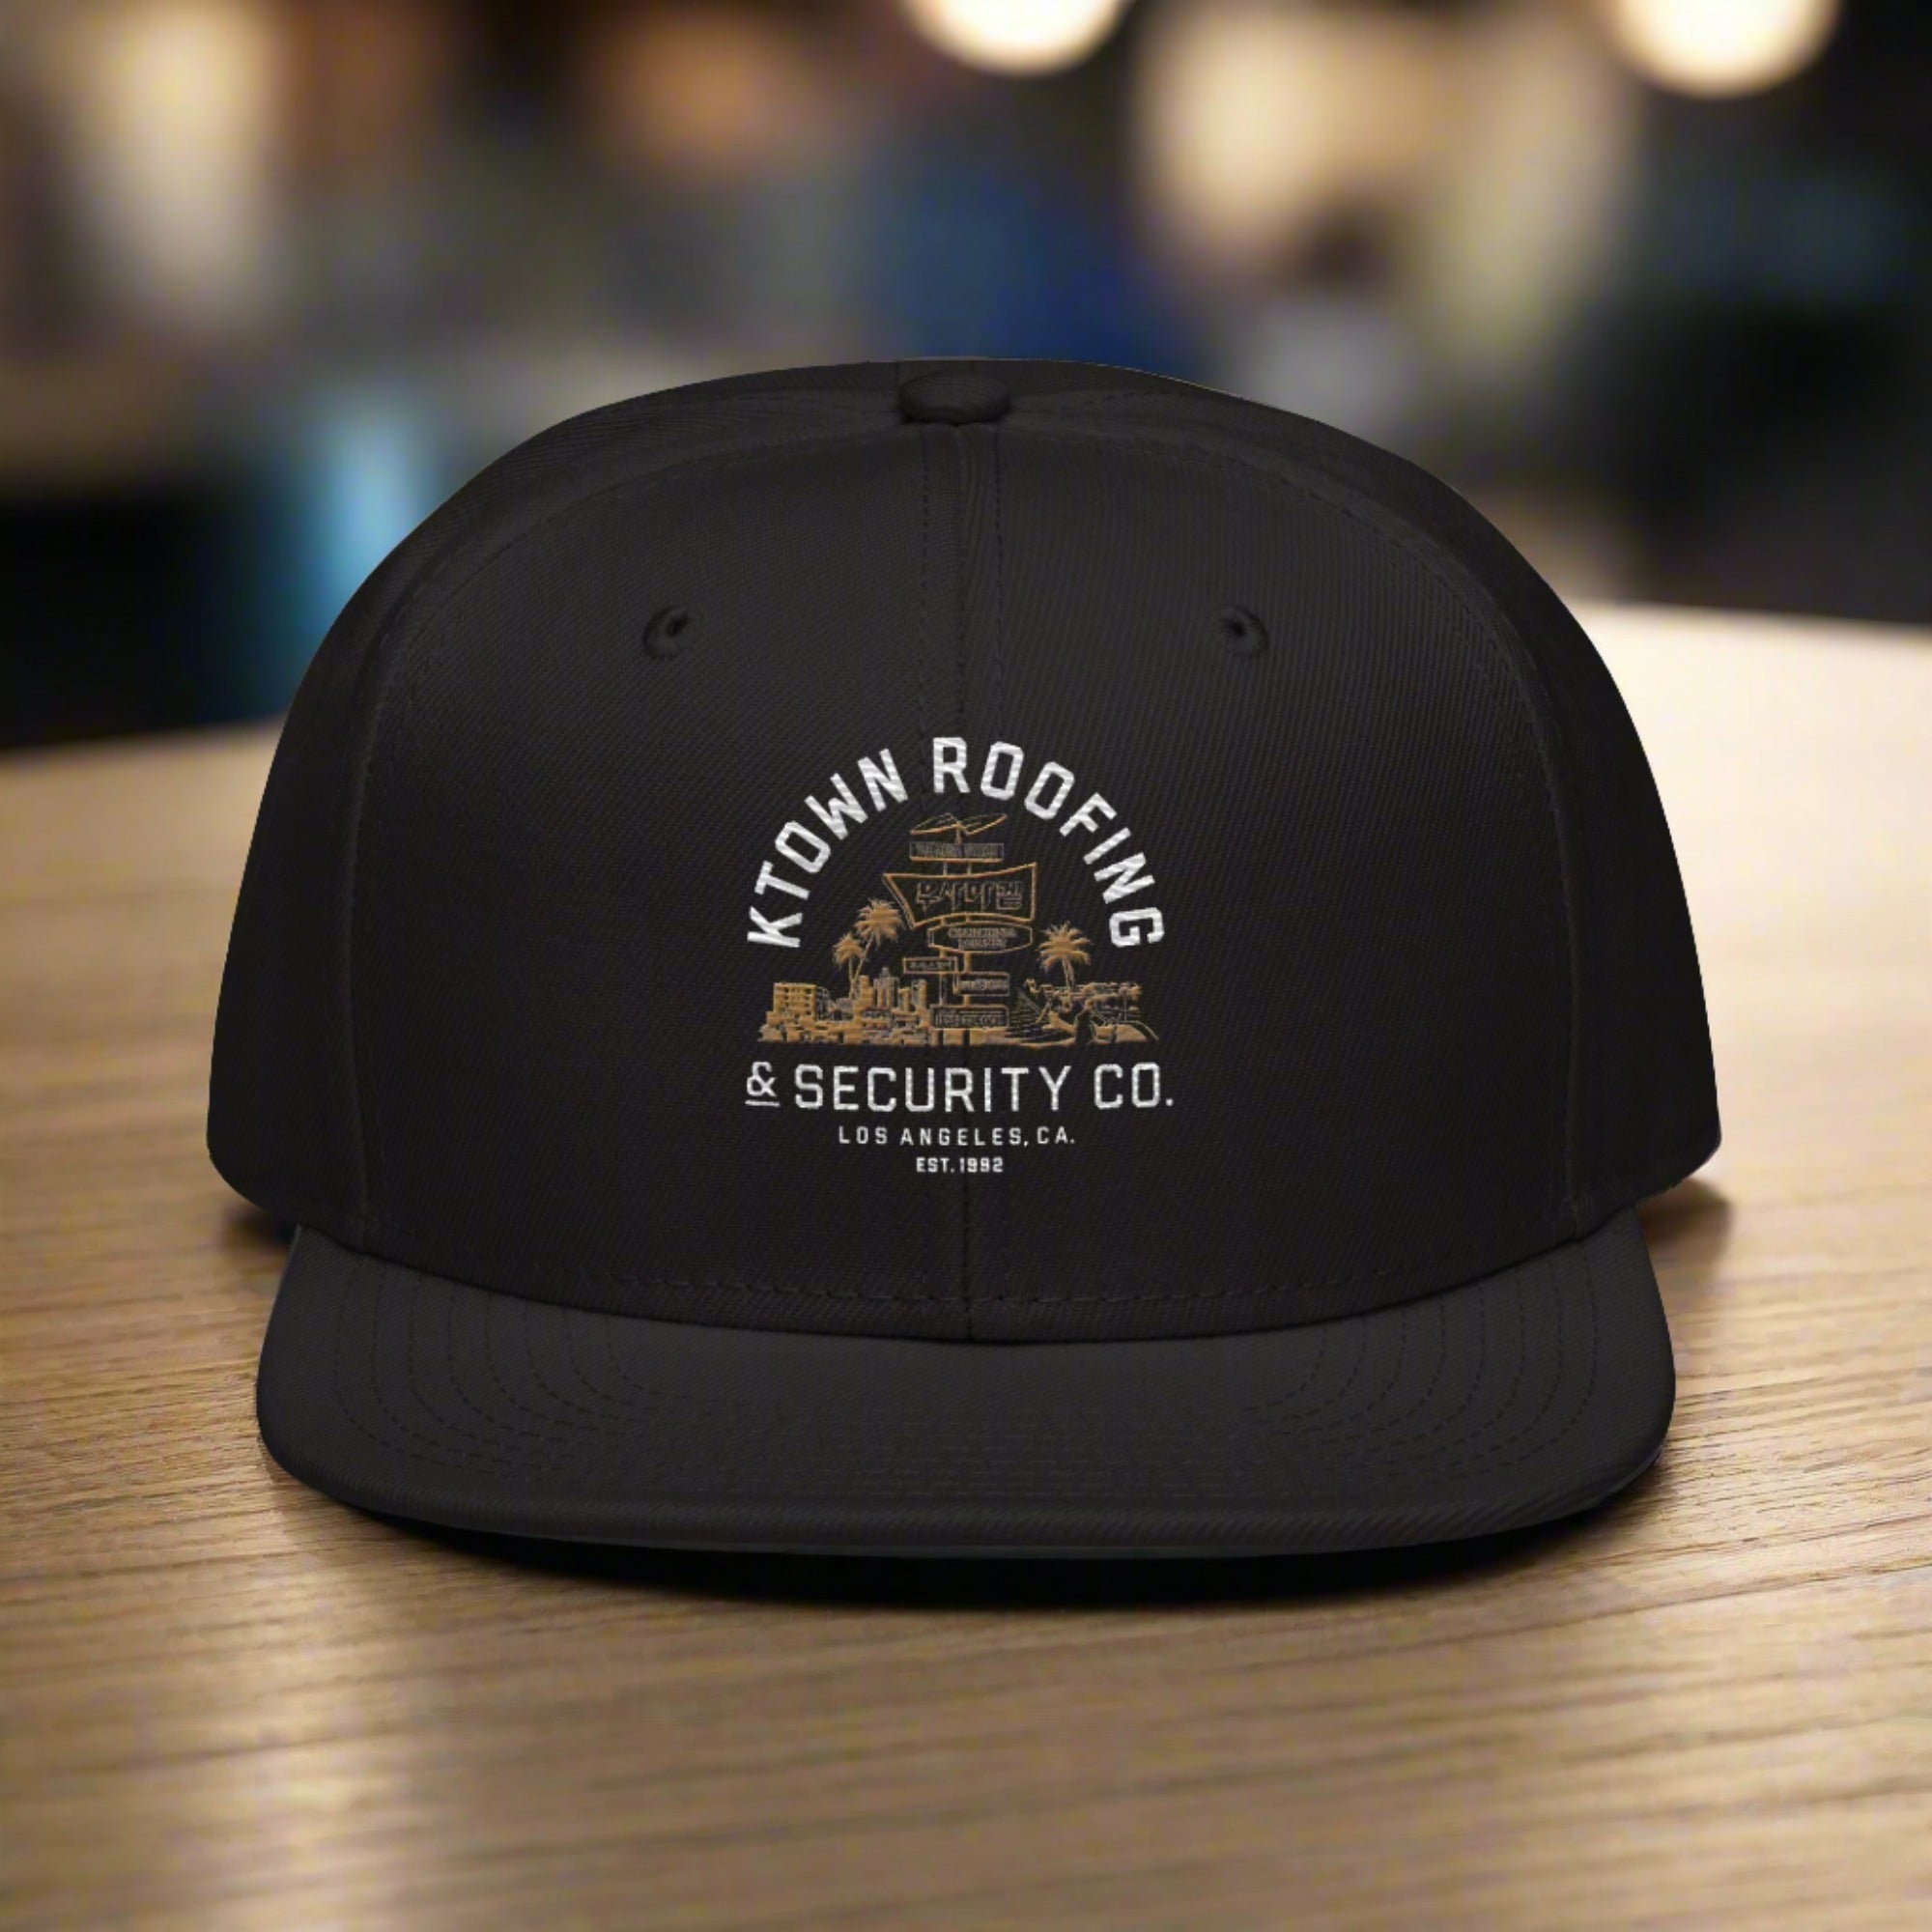 K-Town Roofing & Security Co. Snapback Hat